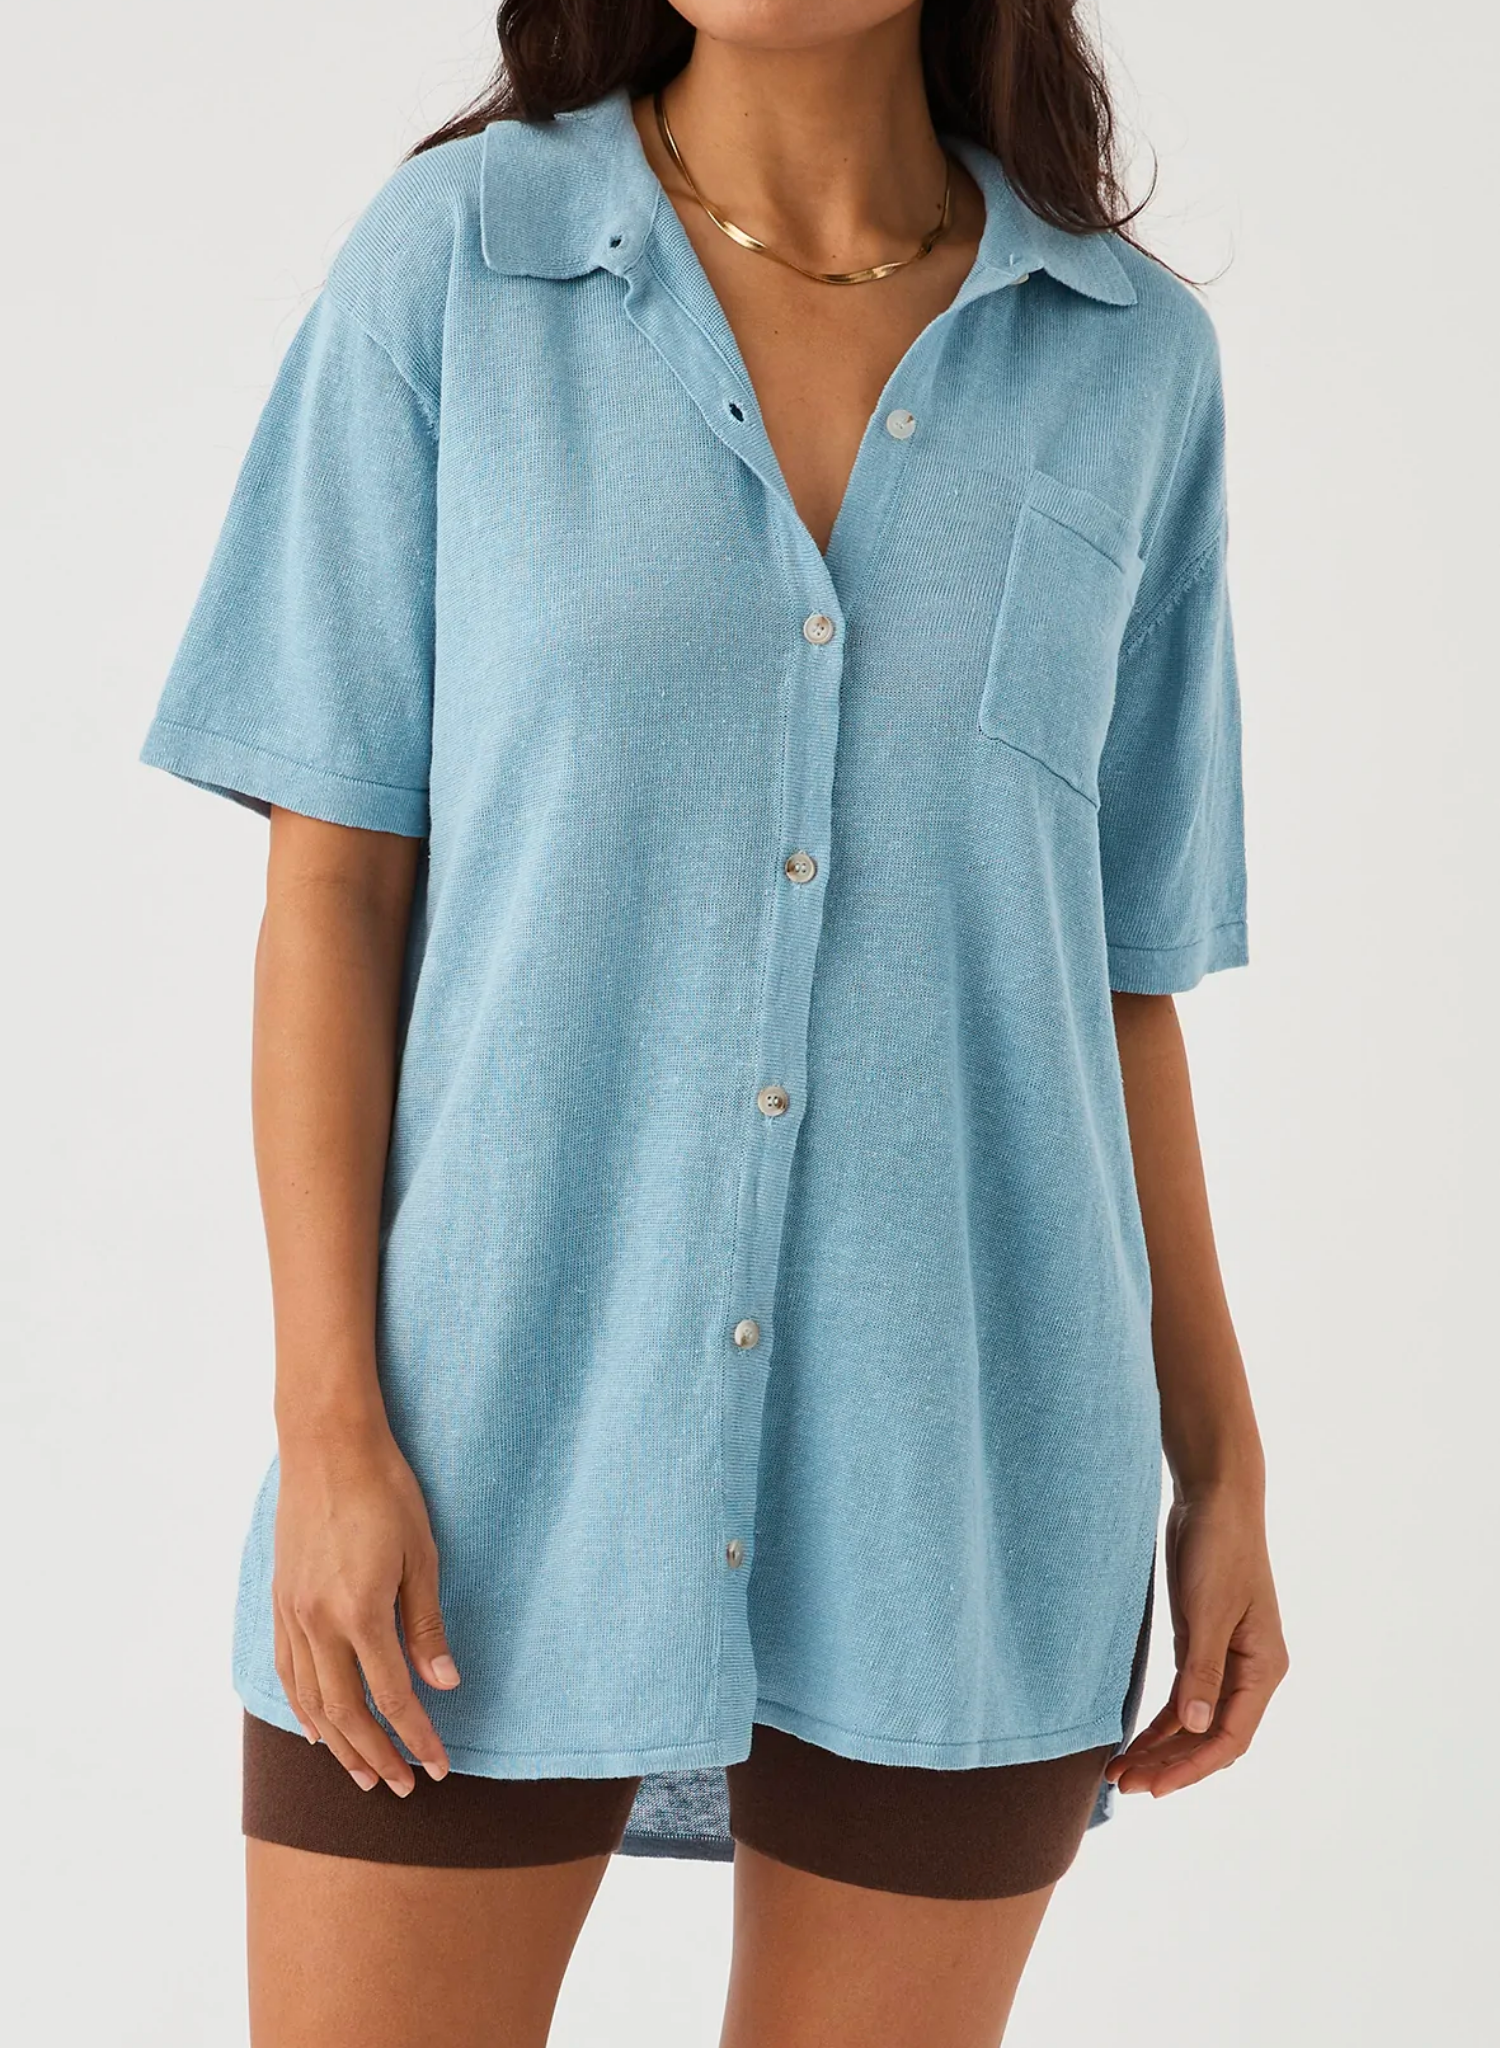 Brie Shirt in Sky Blue. Button Down Front Front Pockets Short Sleeve Oversized Shirt Knitted Organic Linen Ethically produced Free of harmful chemicals: OEKO-TEX Standard 100 This piece is of 100% natural linen, carefully knitted with zero waste. With this is mind, this item appreciates good care so it can be enjoyed for seasons to come.